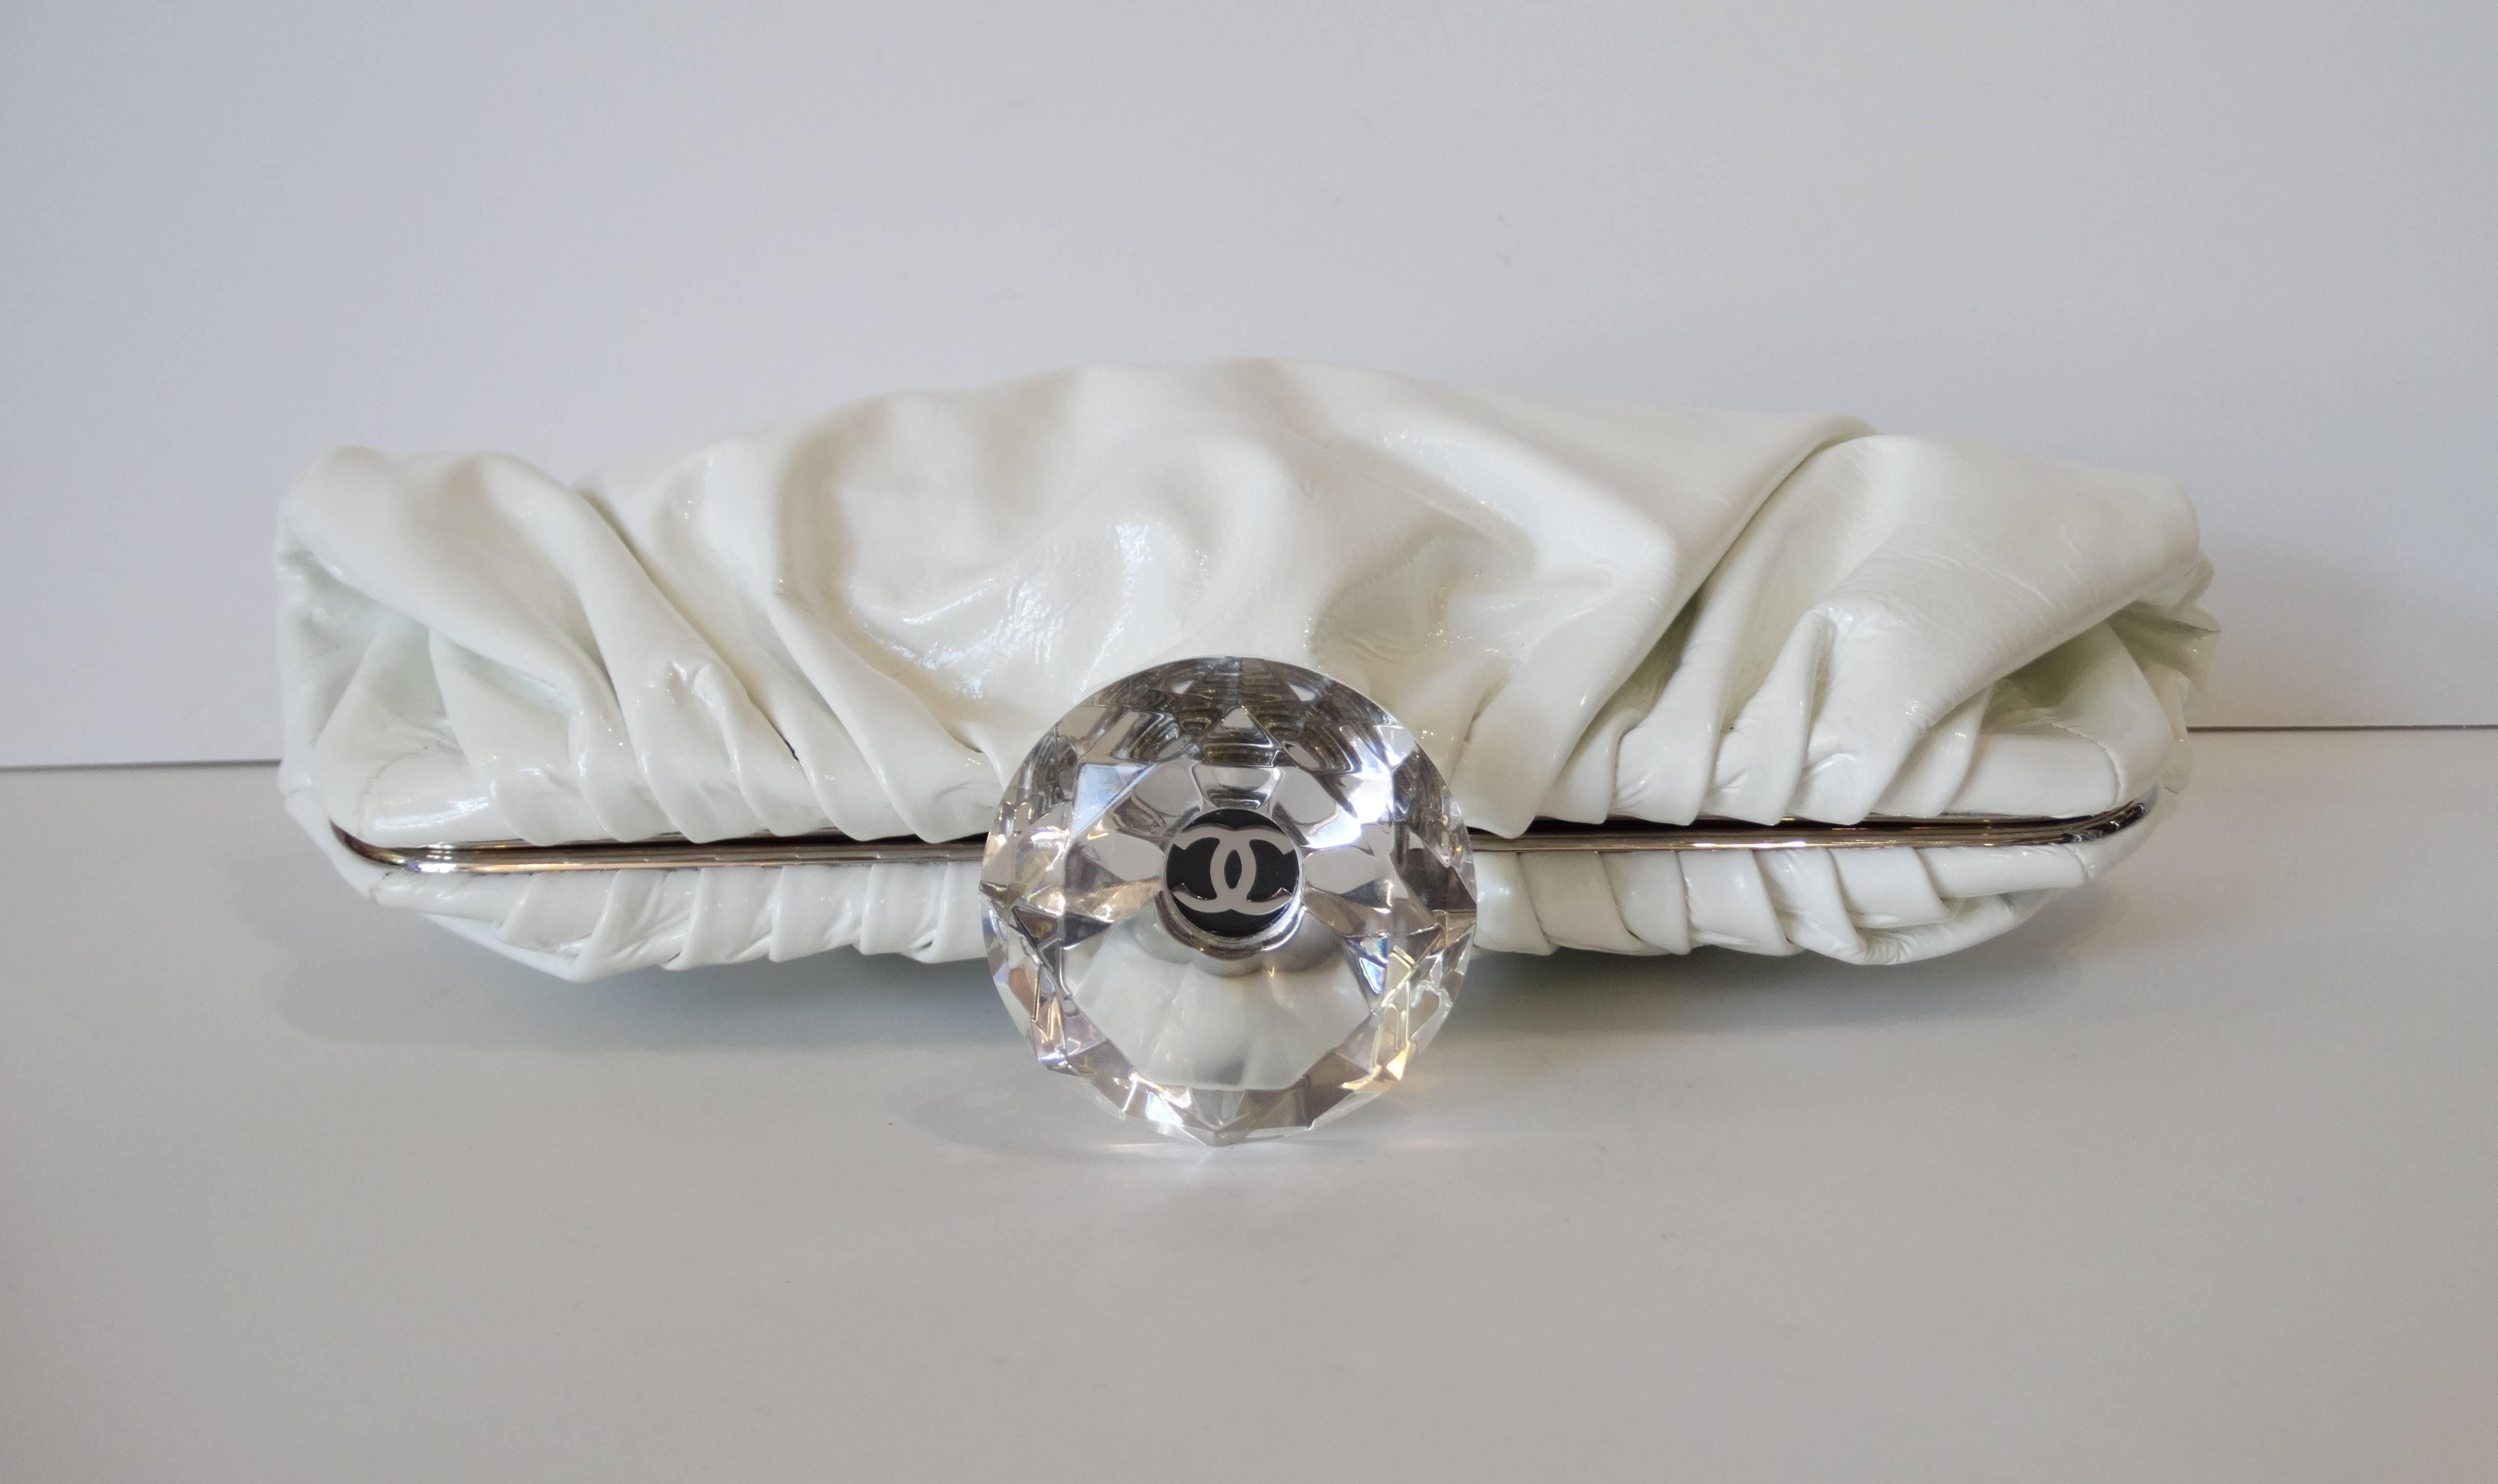 Forget the Hope diamond- we want Chanel diamonds! This incredible clutch comes a soft and shiny white patent leather- accented with silver hardware and of course: an oversized lucite diamond with CC logo in the center. Push lock closure at the top.